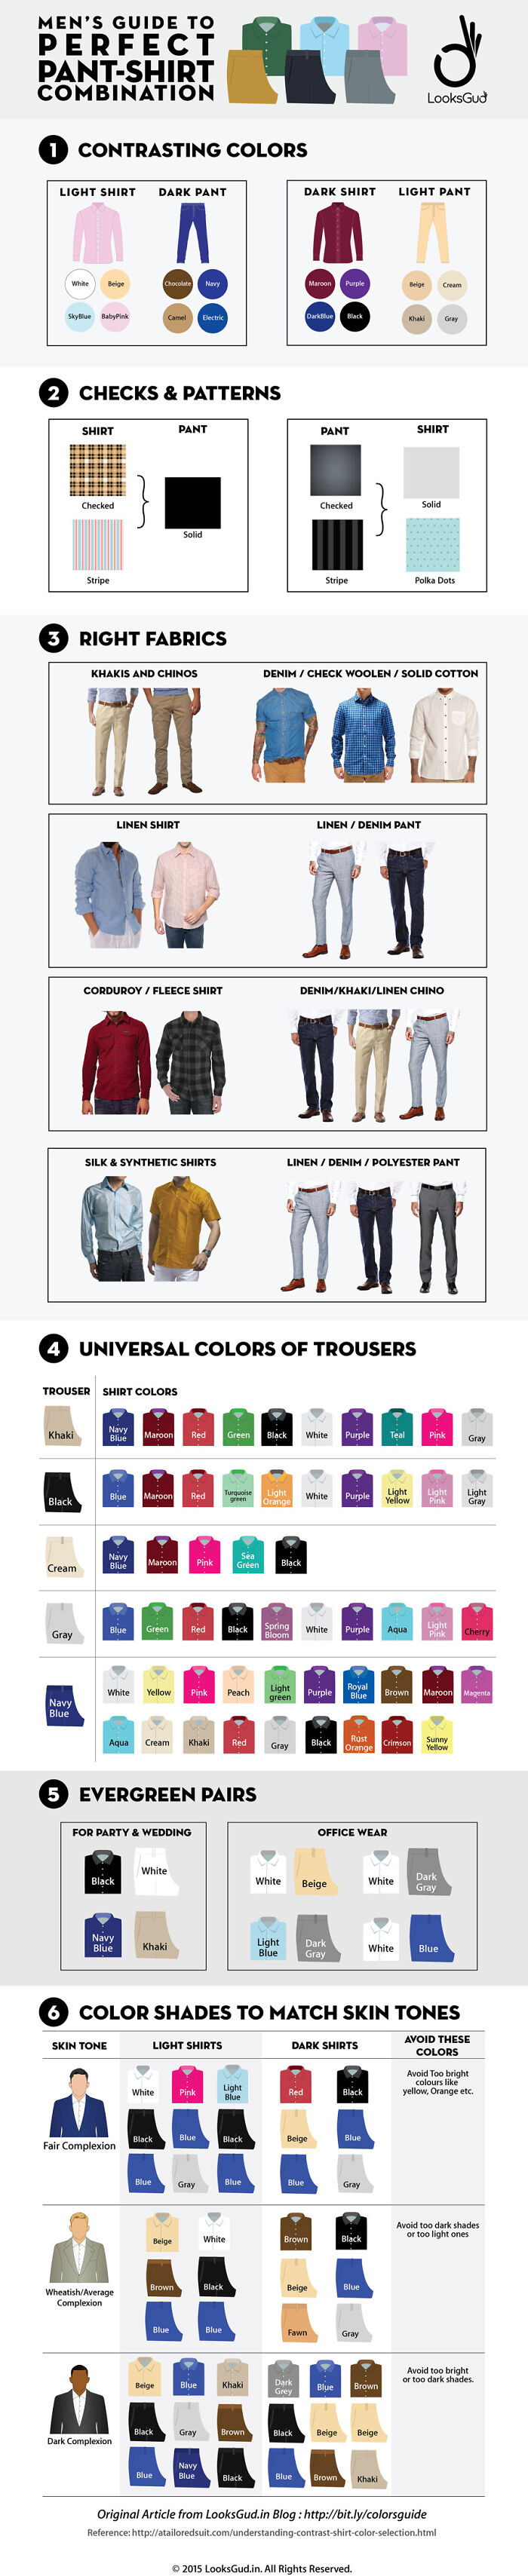 Discover more than 213 shirt and pants color combinations latest